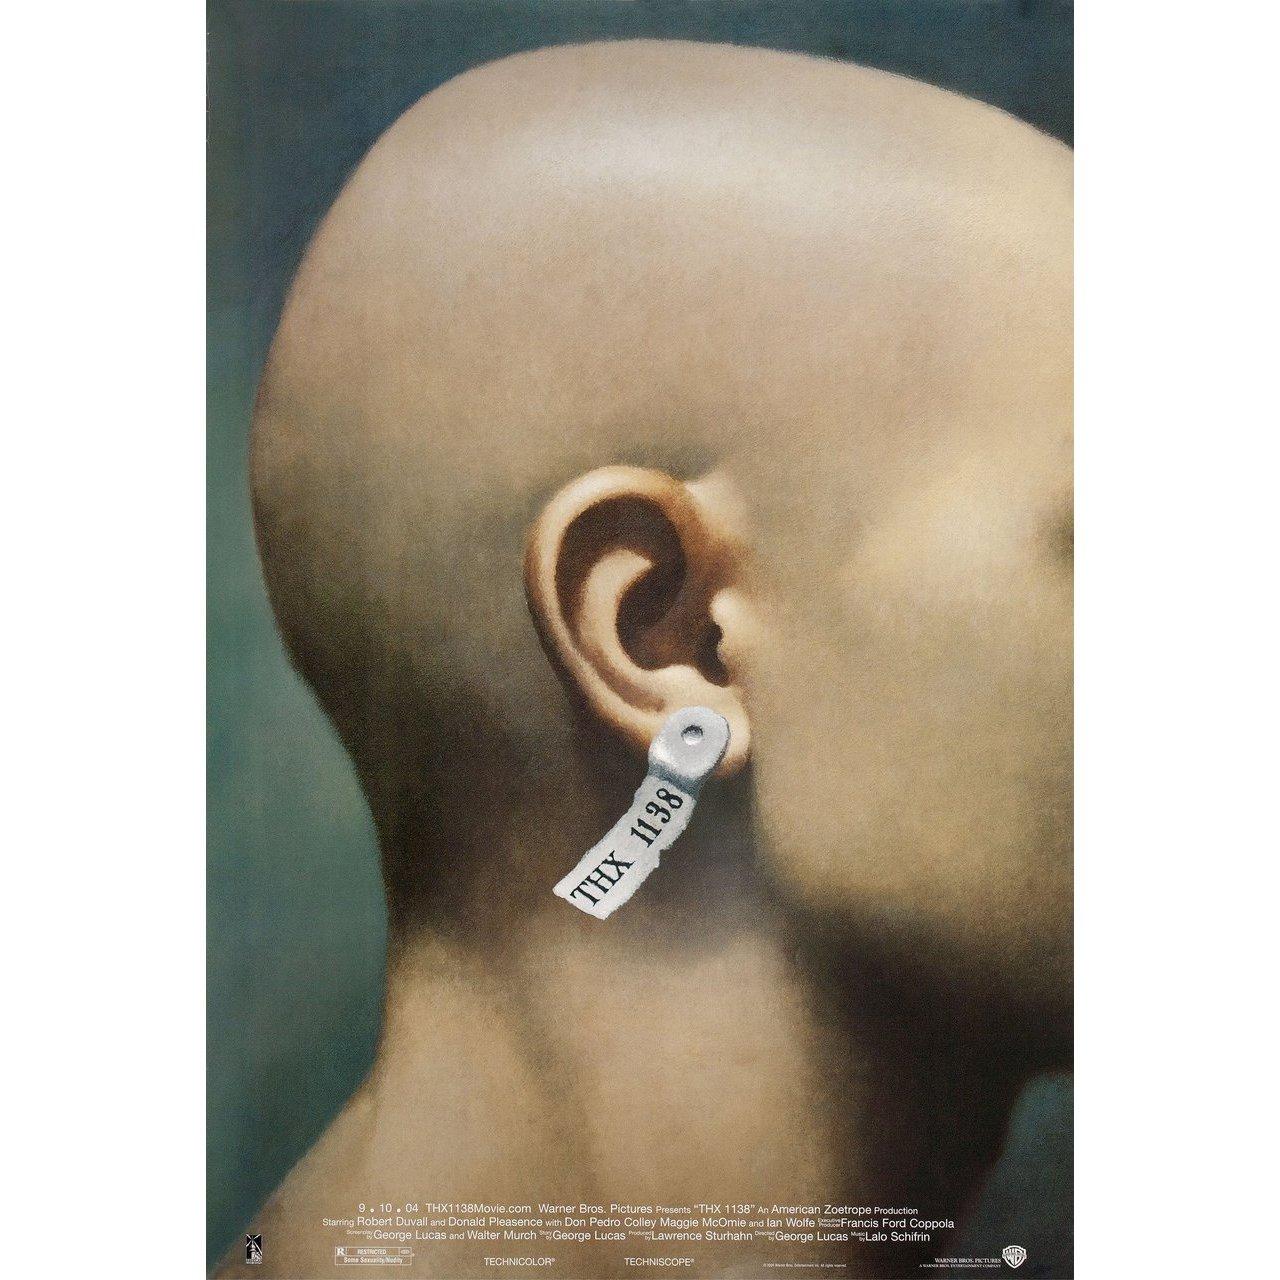 Original 2004 re-release U.S. one sheet poster for the 1971 film THX 1138 directed by George Lucas with Robert Duvall / Donald Pleasence / Don Pedro Colley / Maggie McOmie. Very good condition, rolled. Please note: the size is stated in inches and